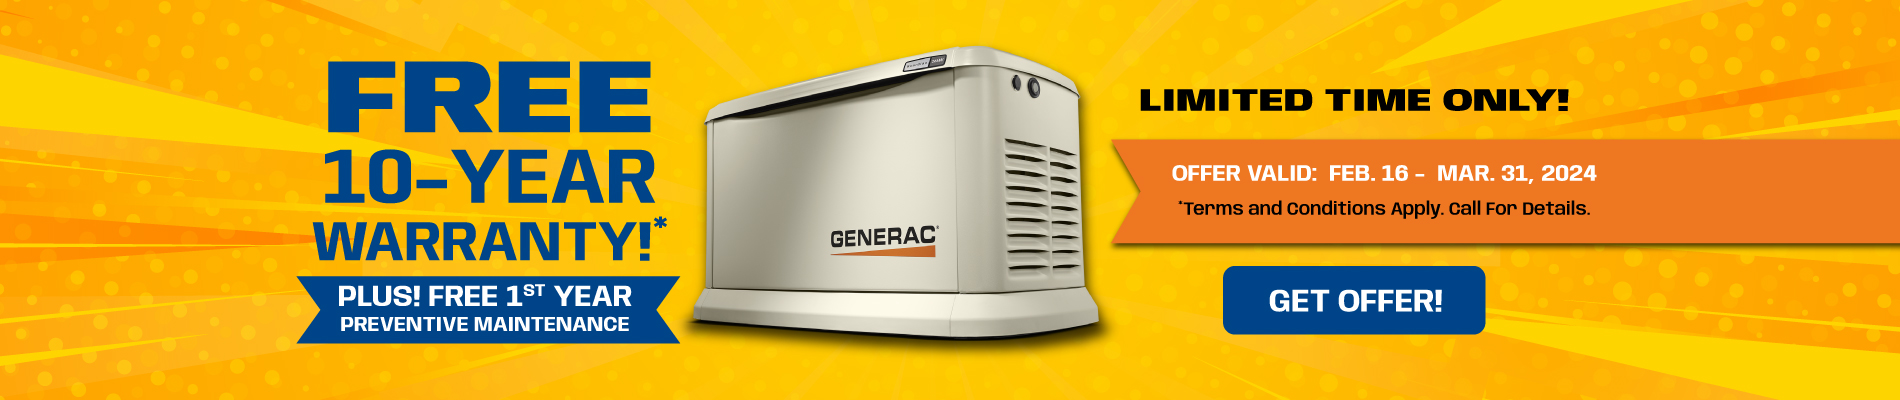 FREE 10 year extended warranty with purchase and installation of a Generac Home Standby Generator.